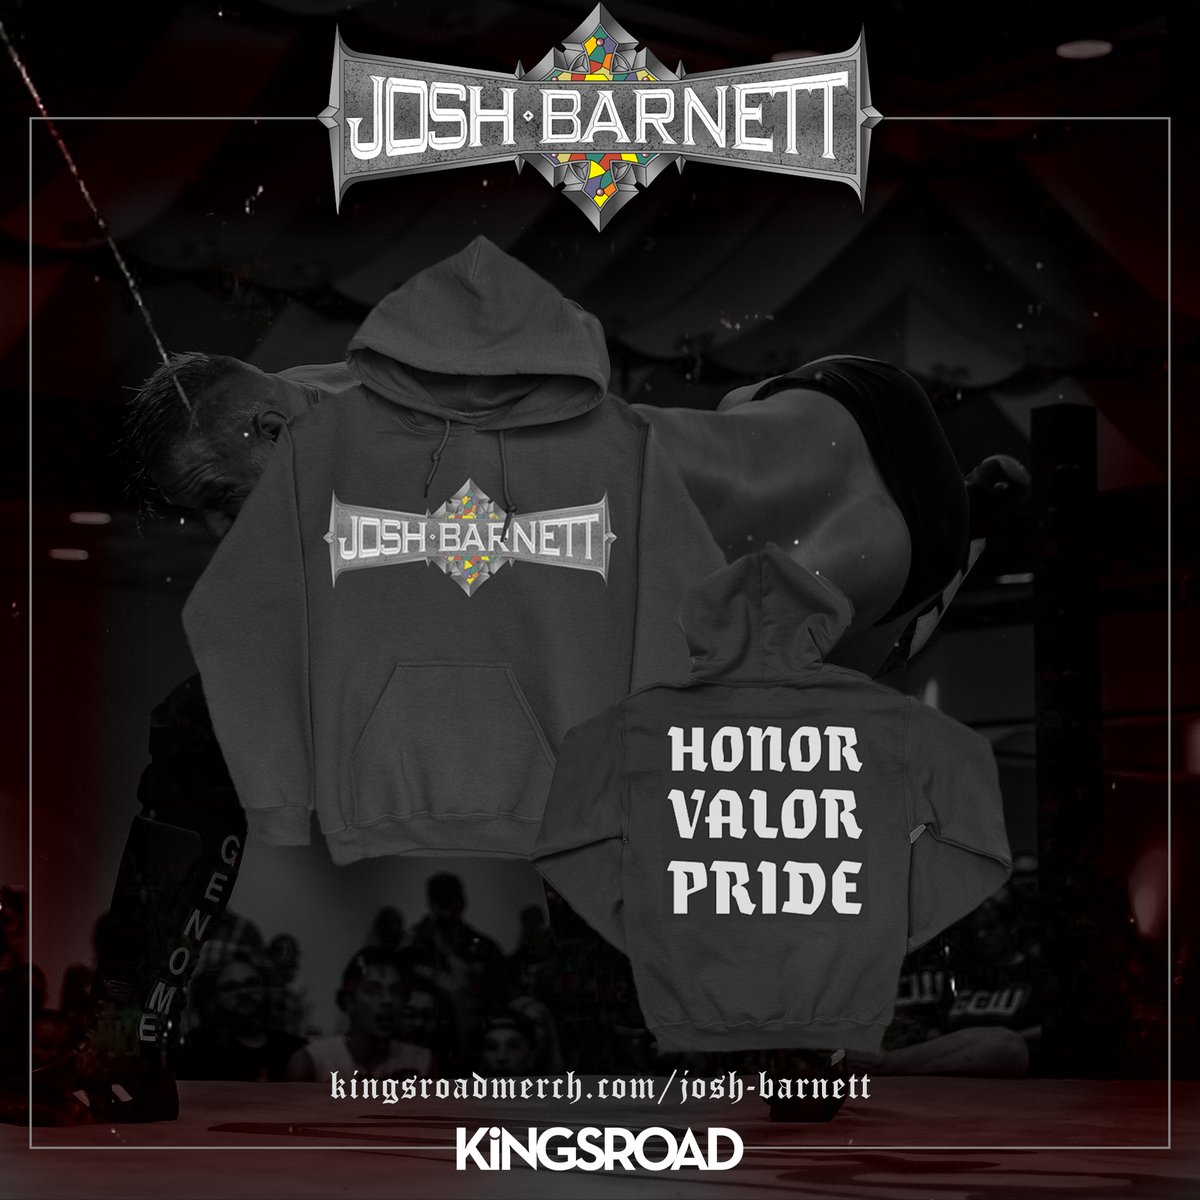 Holiday sale going on at the JB Merch Store. Use code: damnedinblack2023 to save 20% off your order. Use these saving to outfit yourself and those you care about in armor against posers and while looking metal as FVCK. HAIL AND KILL joshbarnett.kingsroadmerch.com